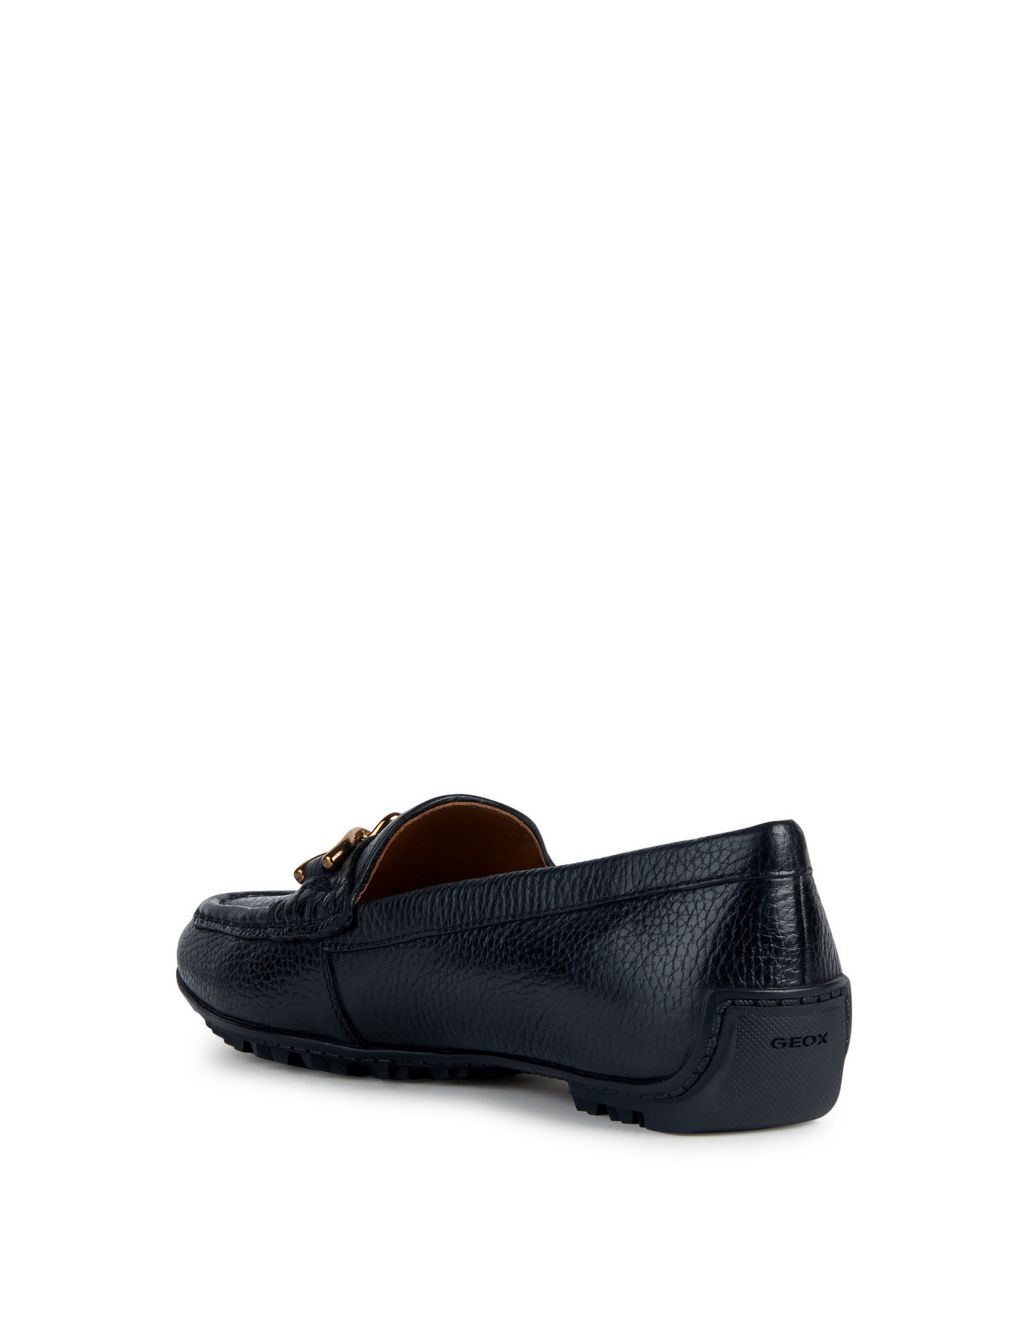 Leather Bar Slip On Flat Loafers 2 of 6